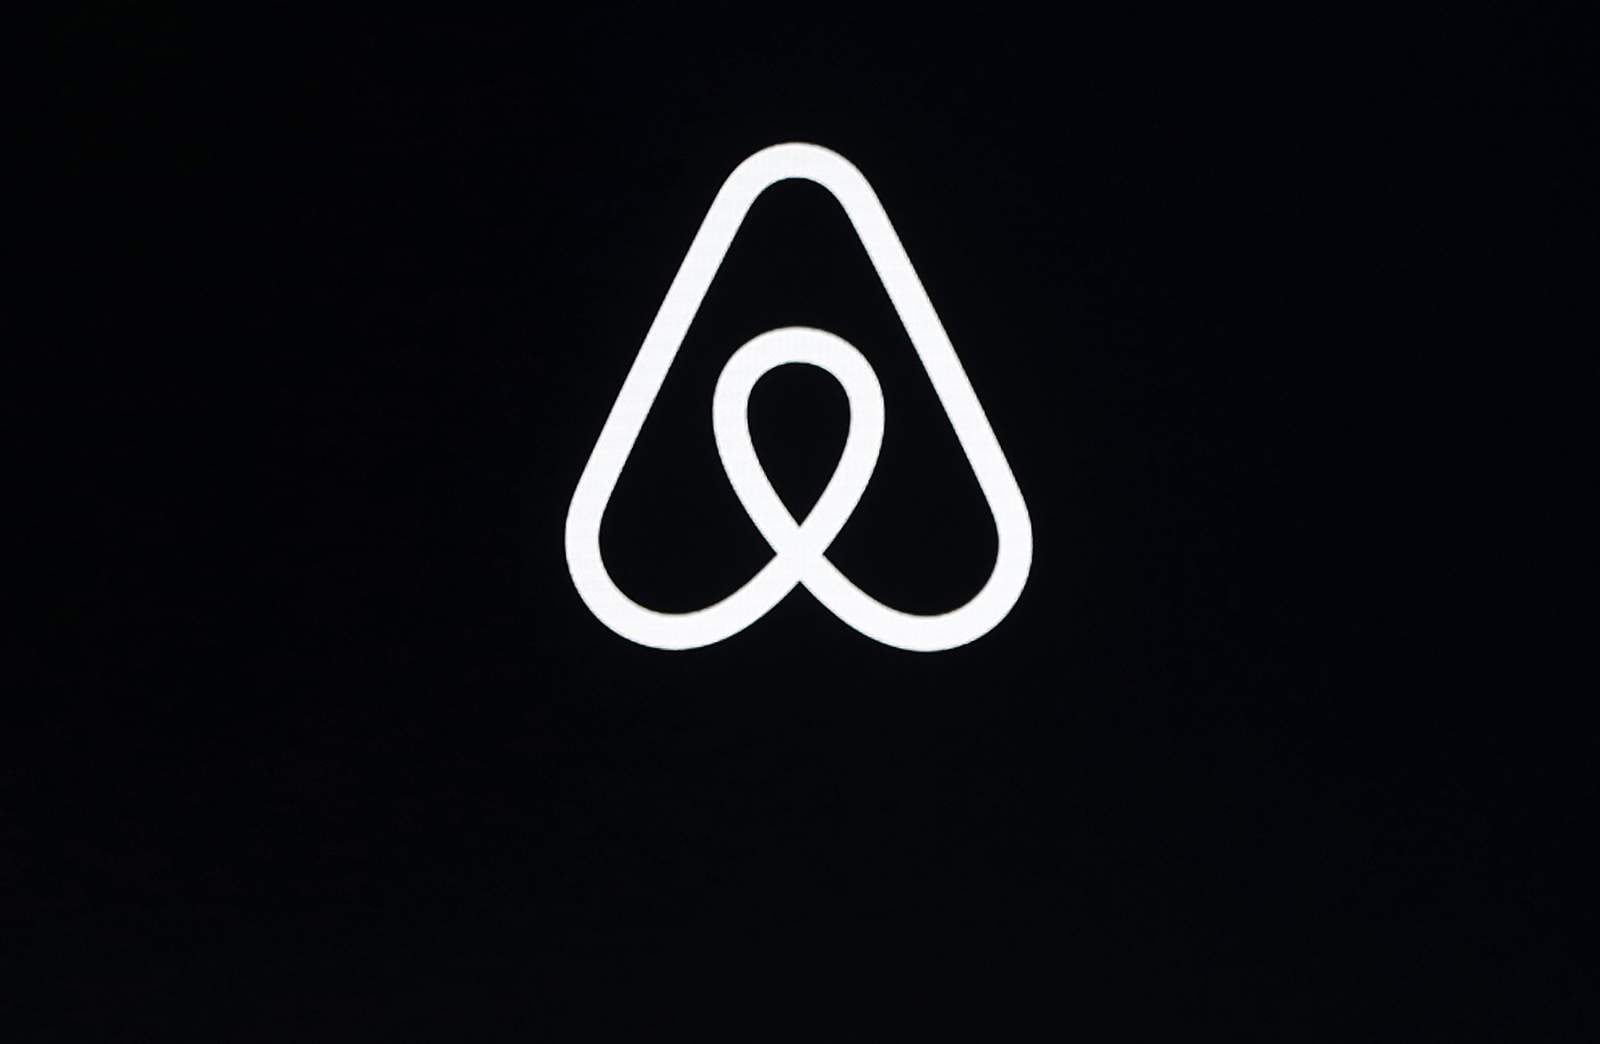 Airbnb details years of losses ahead of planned IPO